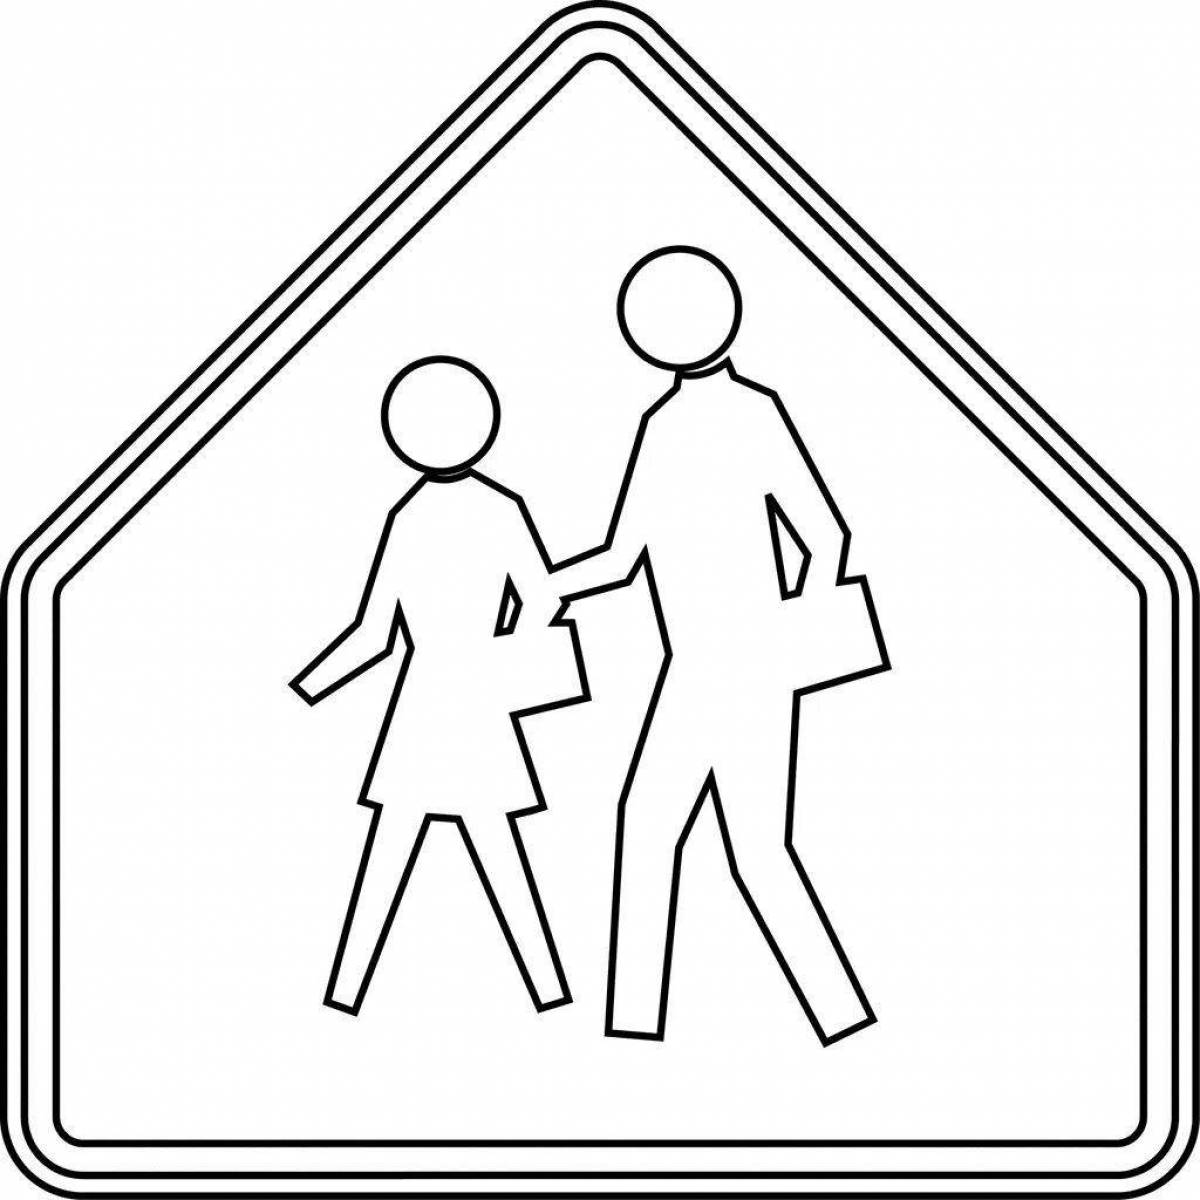 Pedestrian signs coloring page